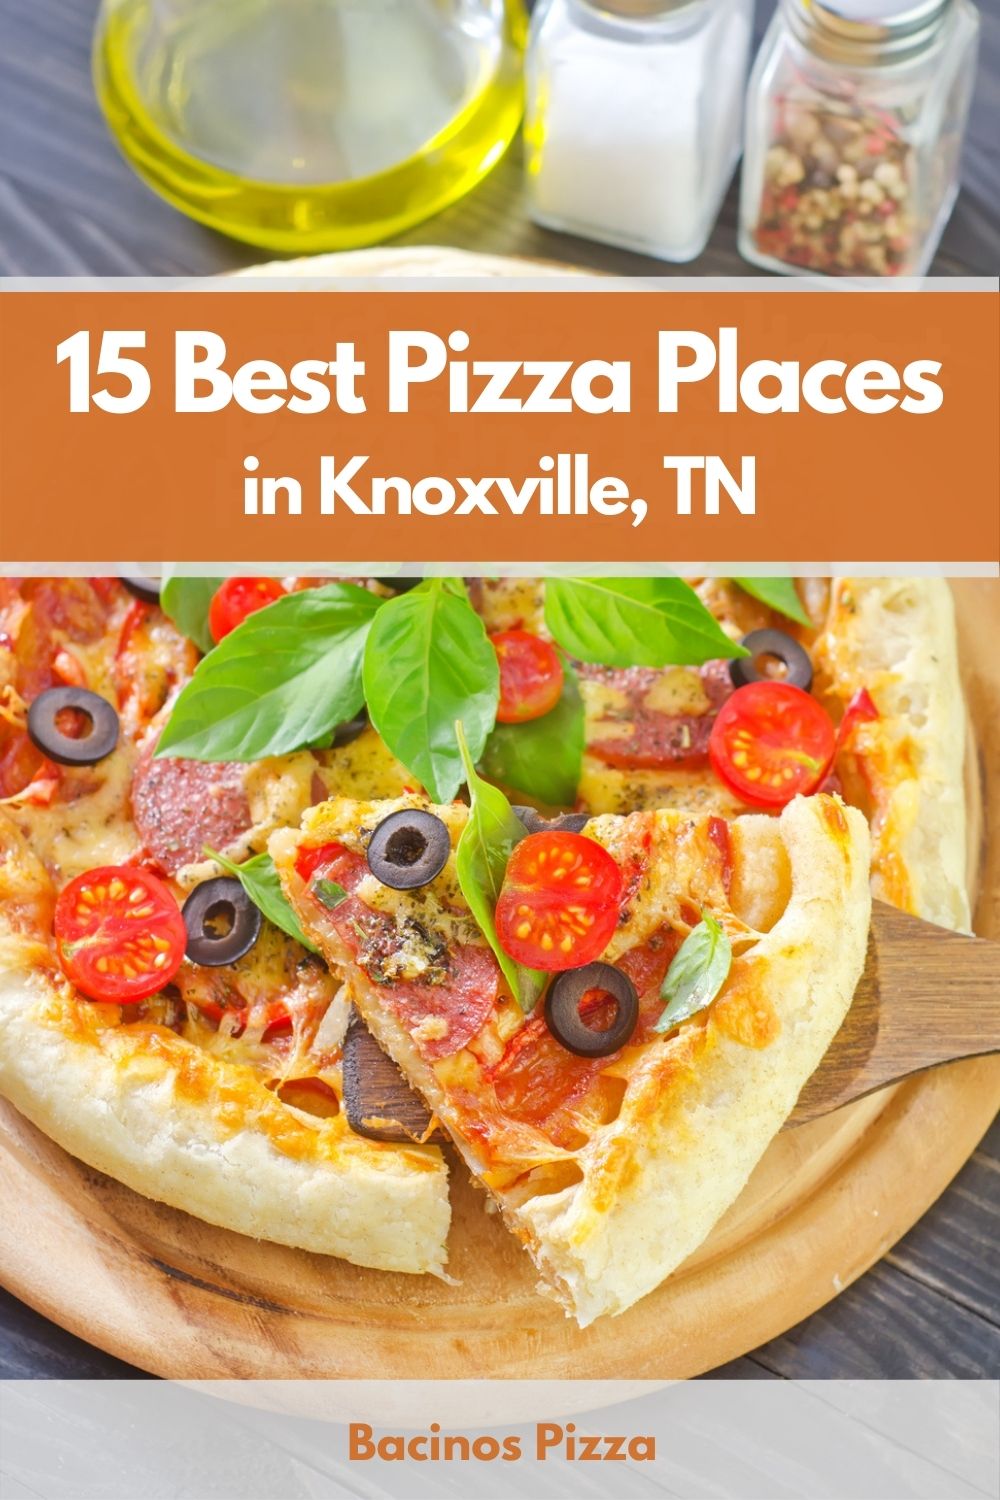 15 Best Pizza Places in Knoxville, TN pin 2